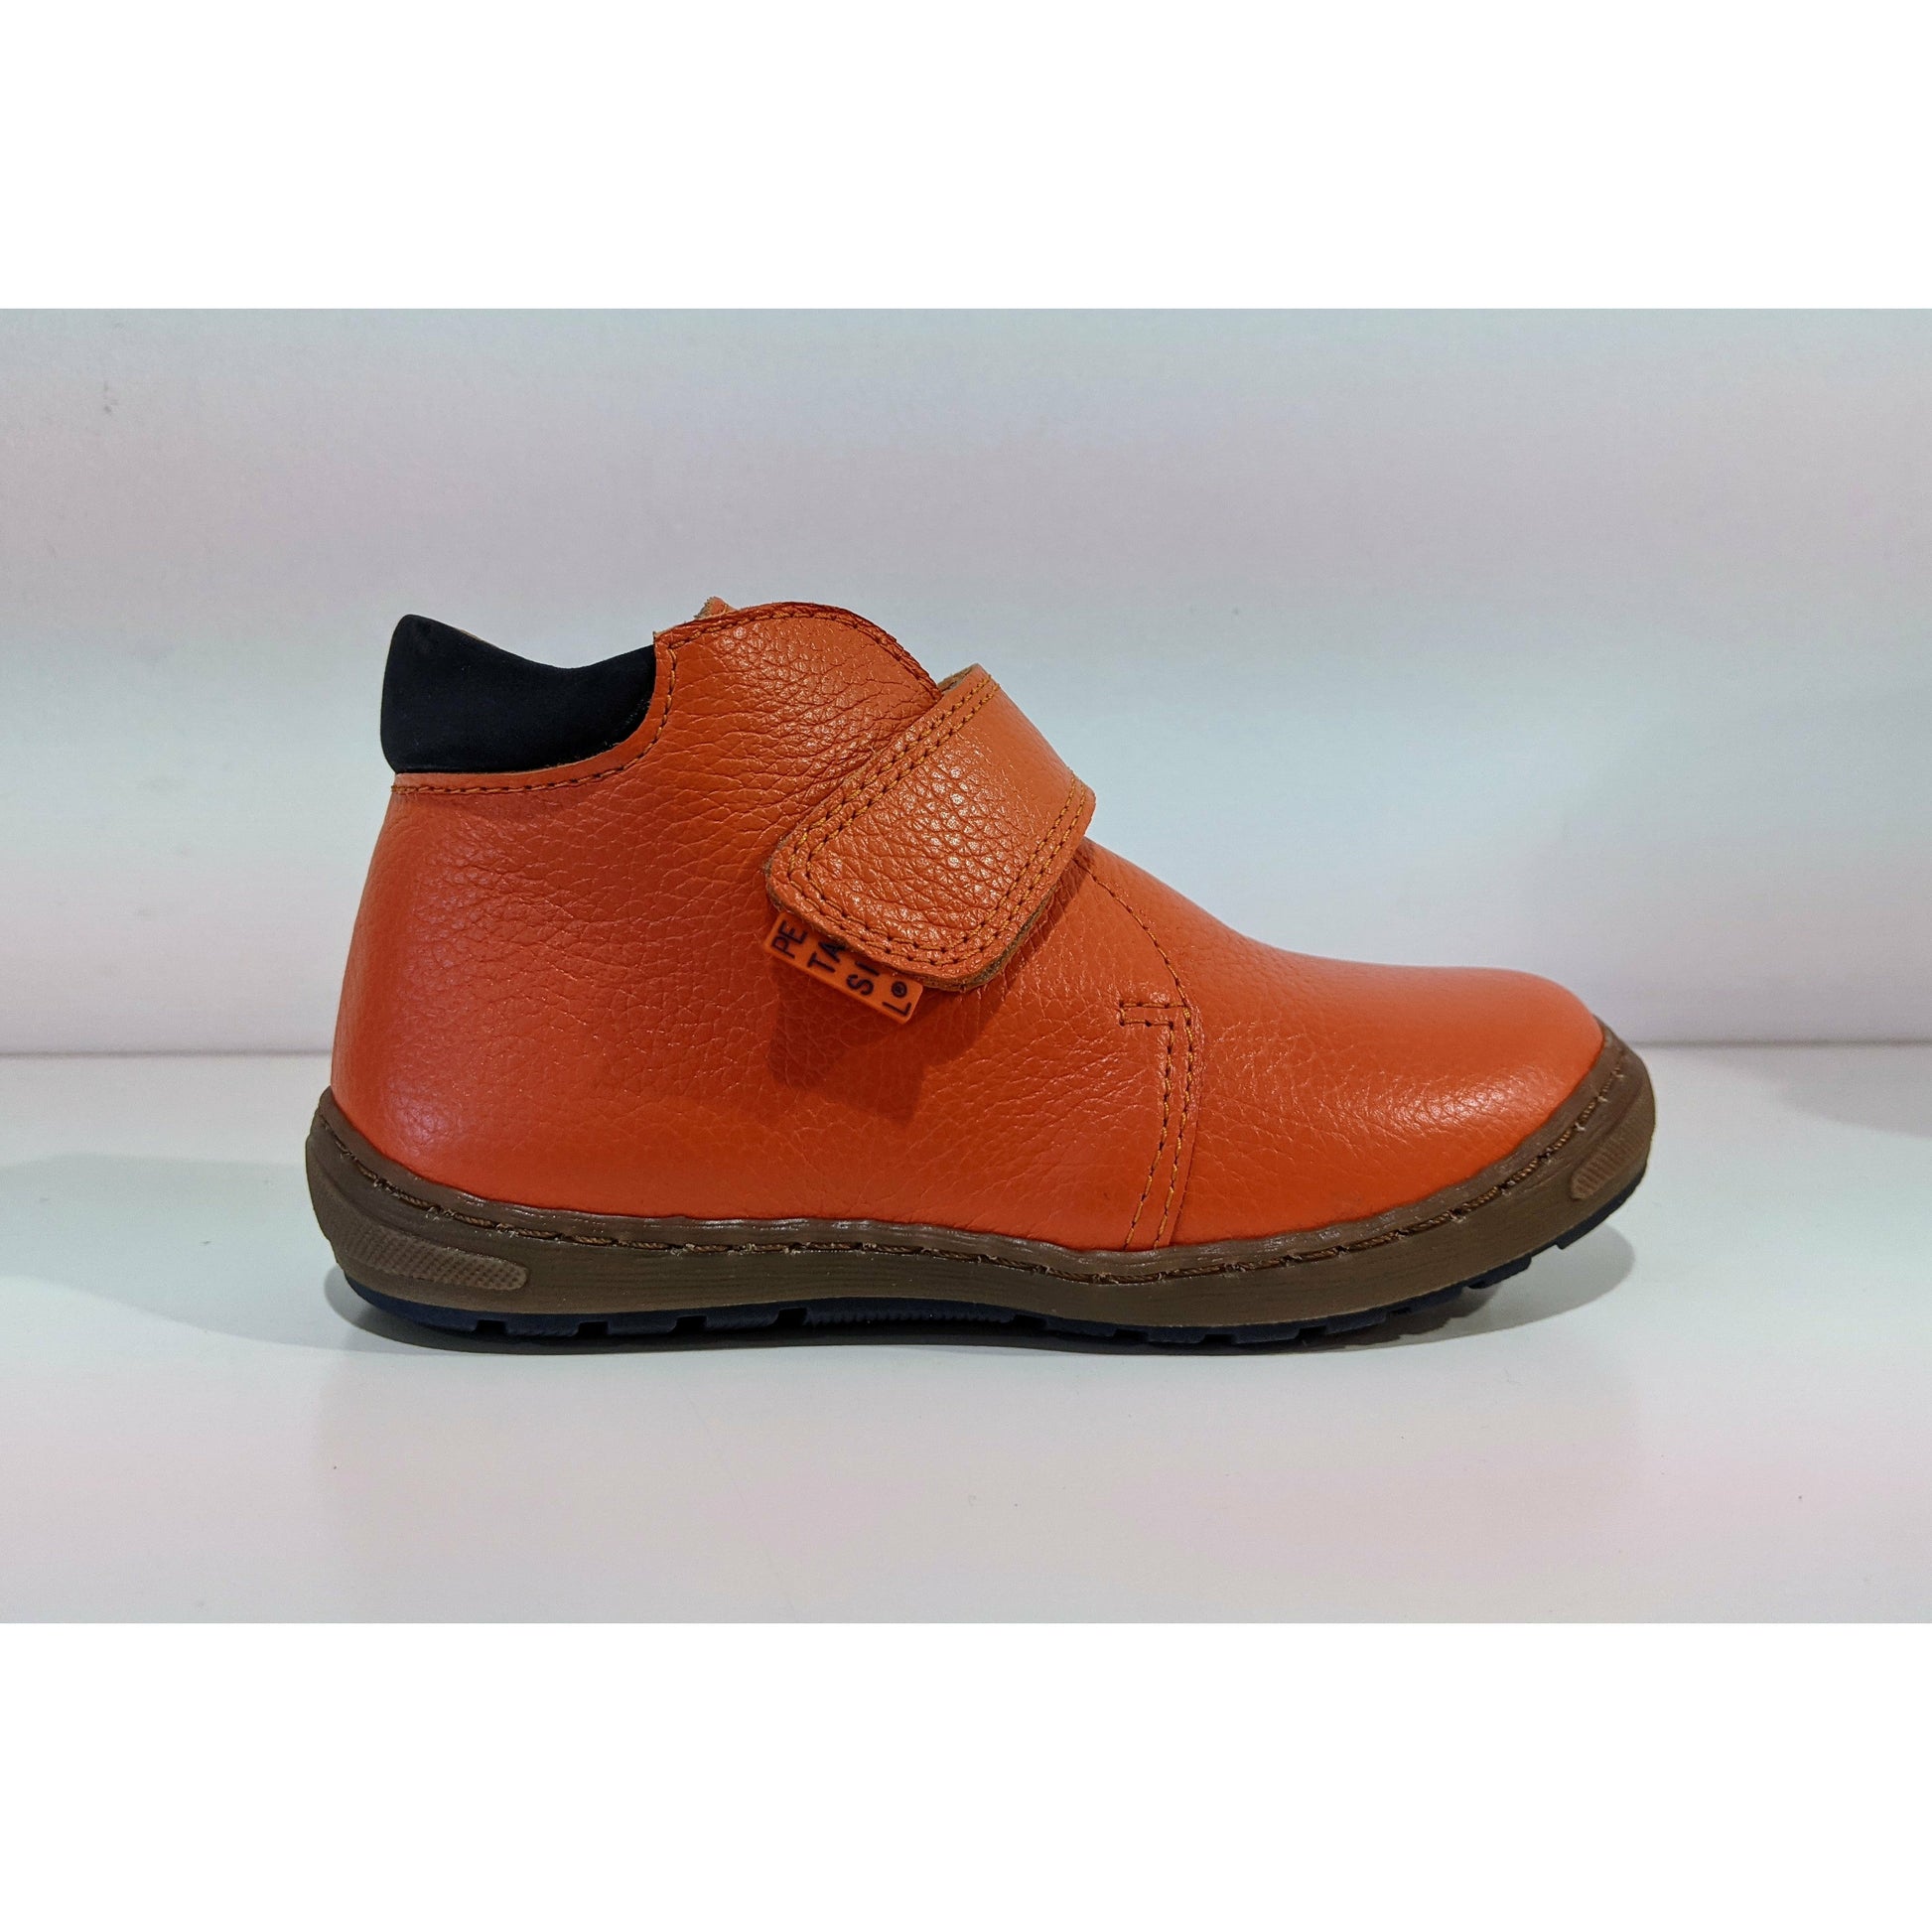 A boys ankle boot by Petasil, style Jason, in orange with velcro fastening. Right side view.